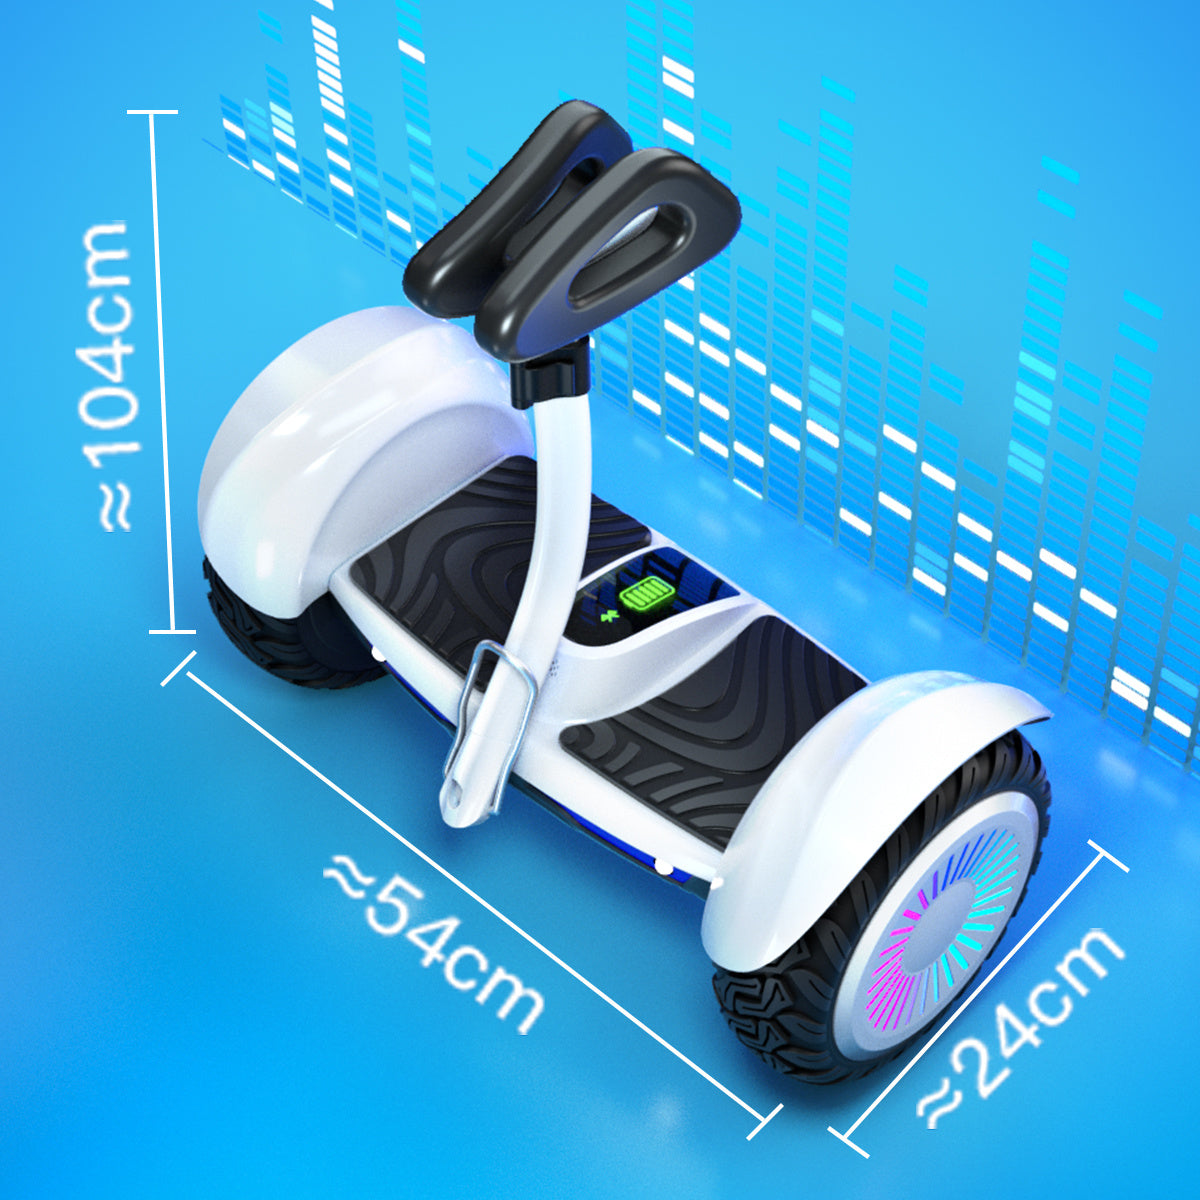 IE-K8 Electric Scooter